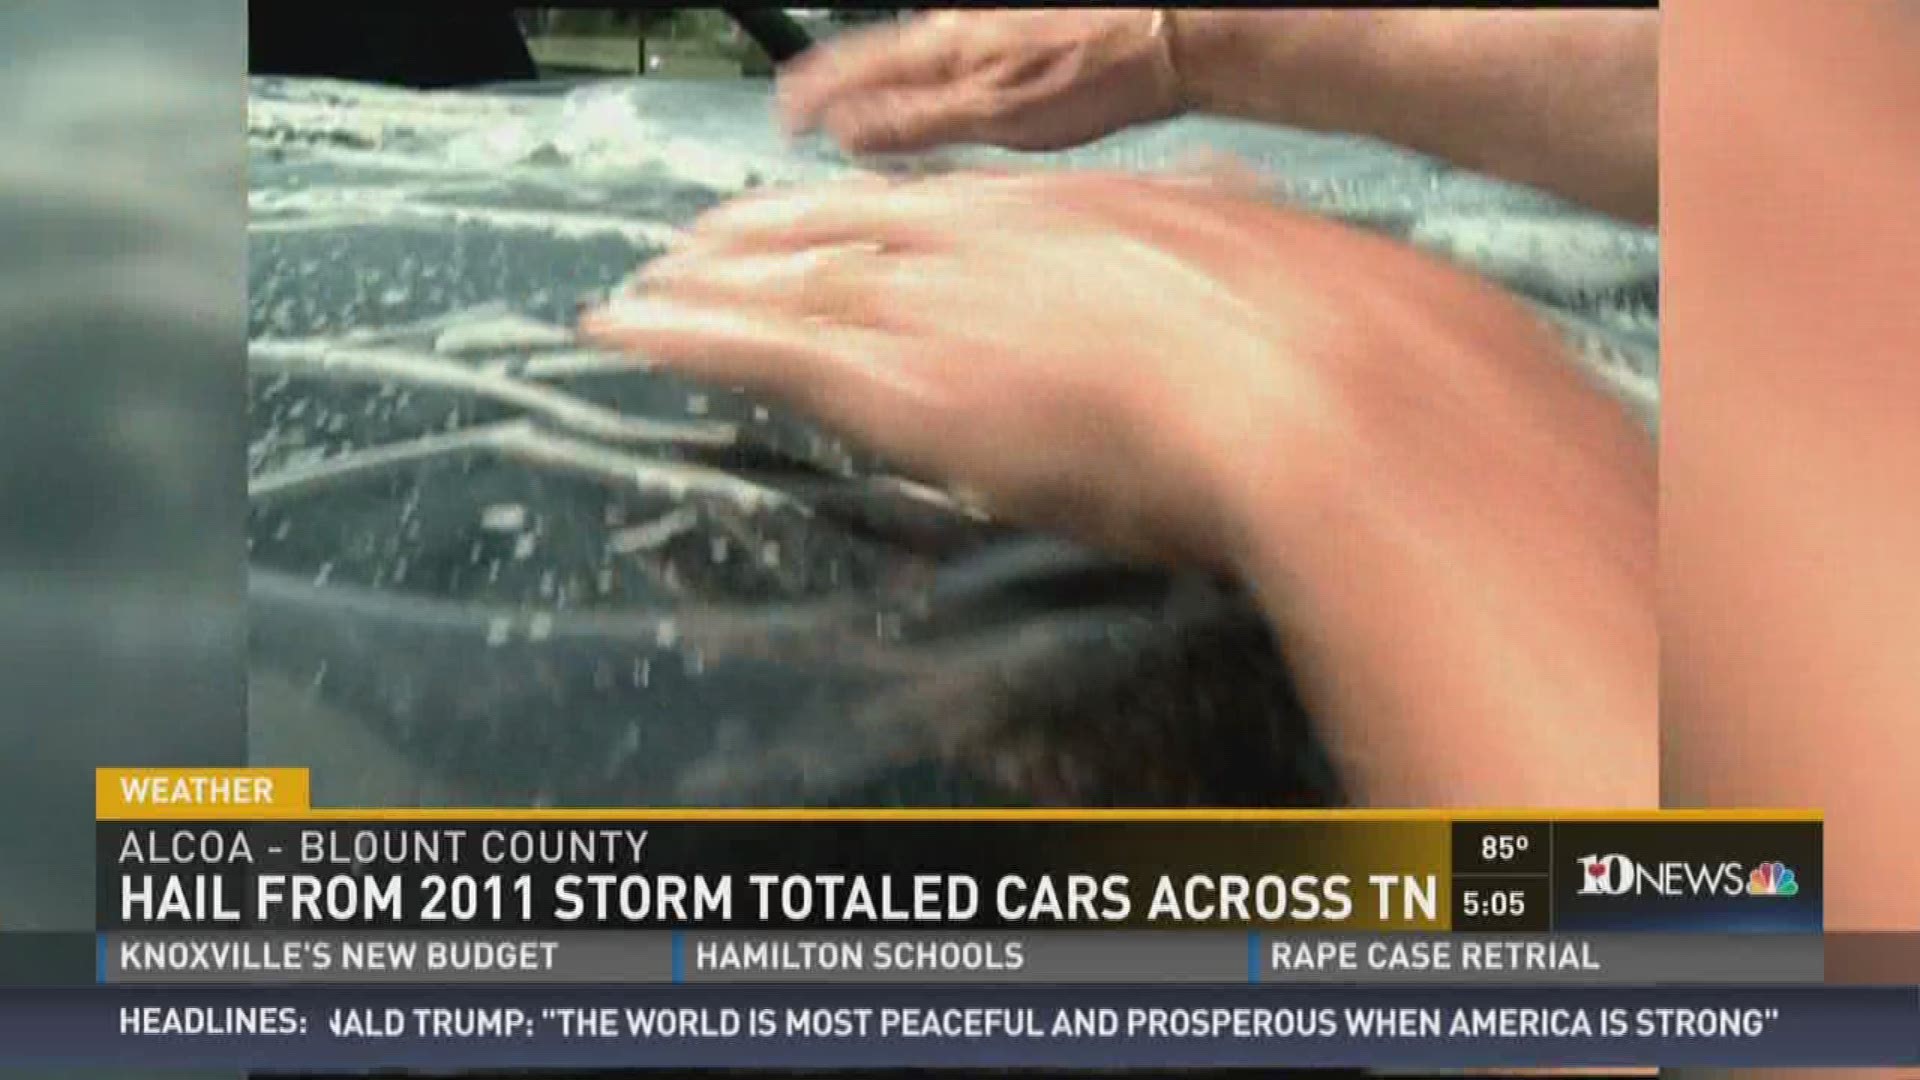 The hail from the April 27, 2011 storms caused millions of dollars in damages